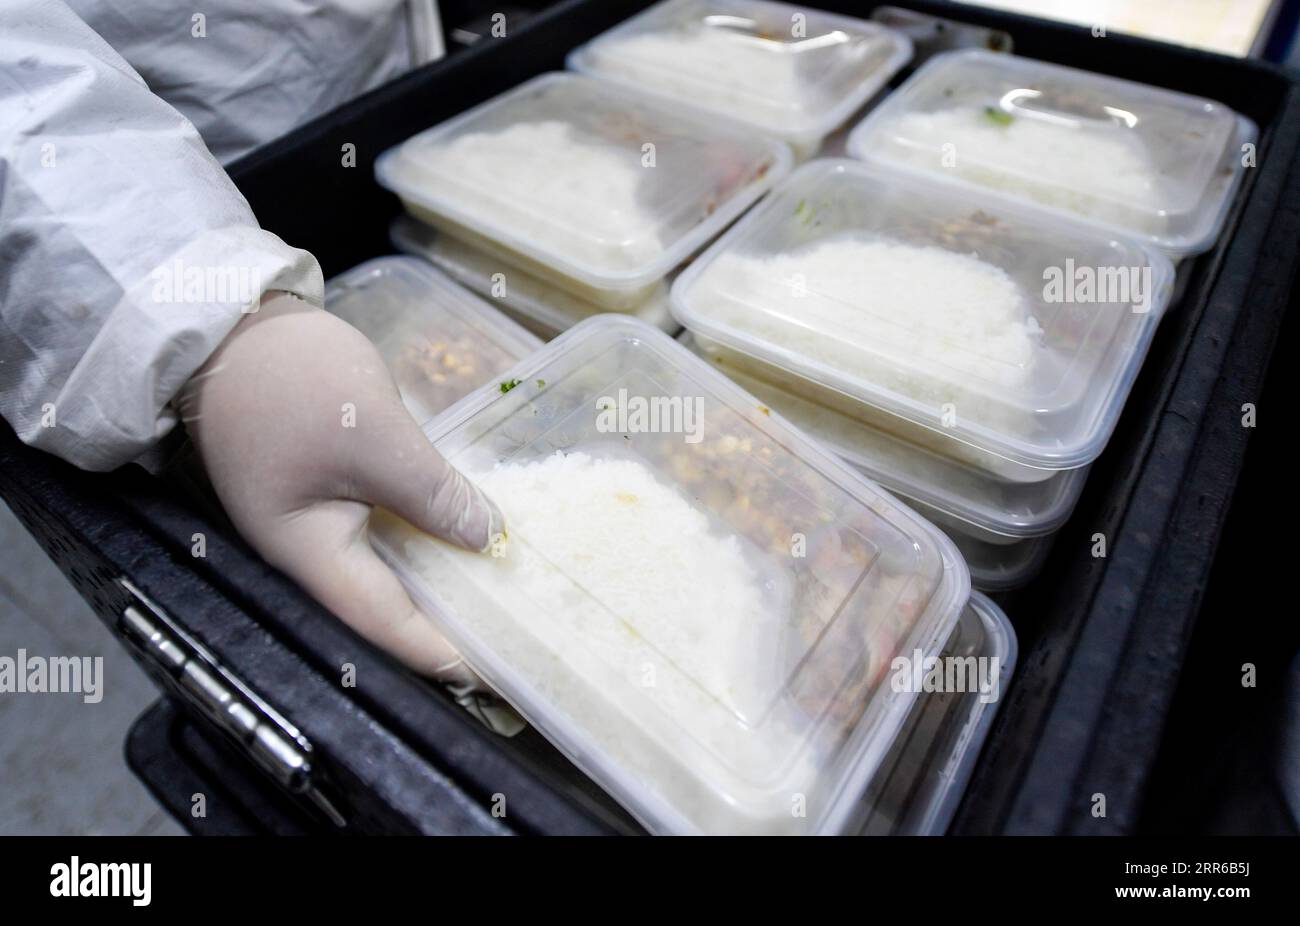 210203 -- TONGHUA, Feb. 3, 2021 -- Distribution workers package boxed meals in Jiahe Catering Company in Tonghua City of northeast China s Jilin Province, Jan. 21, 2021. The city is slowing down to curb the pandemic, but we re not closing up. Instead, we re busier than ever, said Zhao Hongxia, general manager of Jiahe Catering Company. The company was originally a boxed meal supplier for primary and secondary schools in Tonghua City. Since the COVID-19 outbreak in Tonghua, the company has accepted a new task of providing meals to front-line staff and people under quarantine. More than 30,000 b Stock Photo